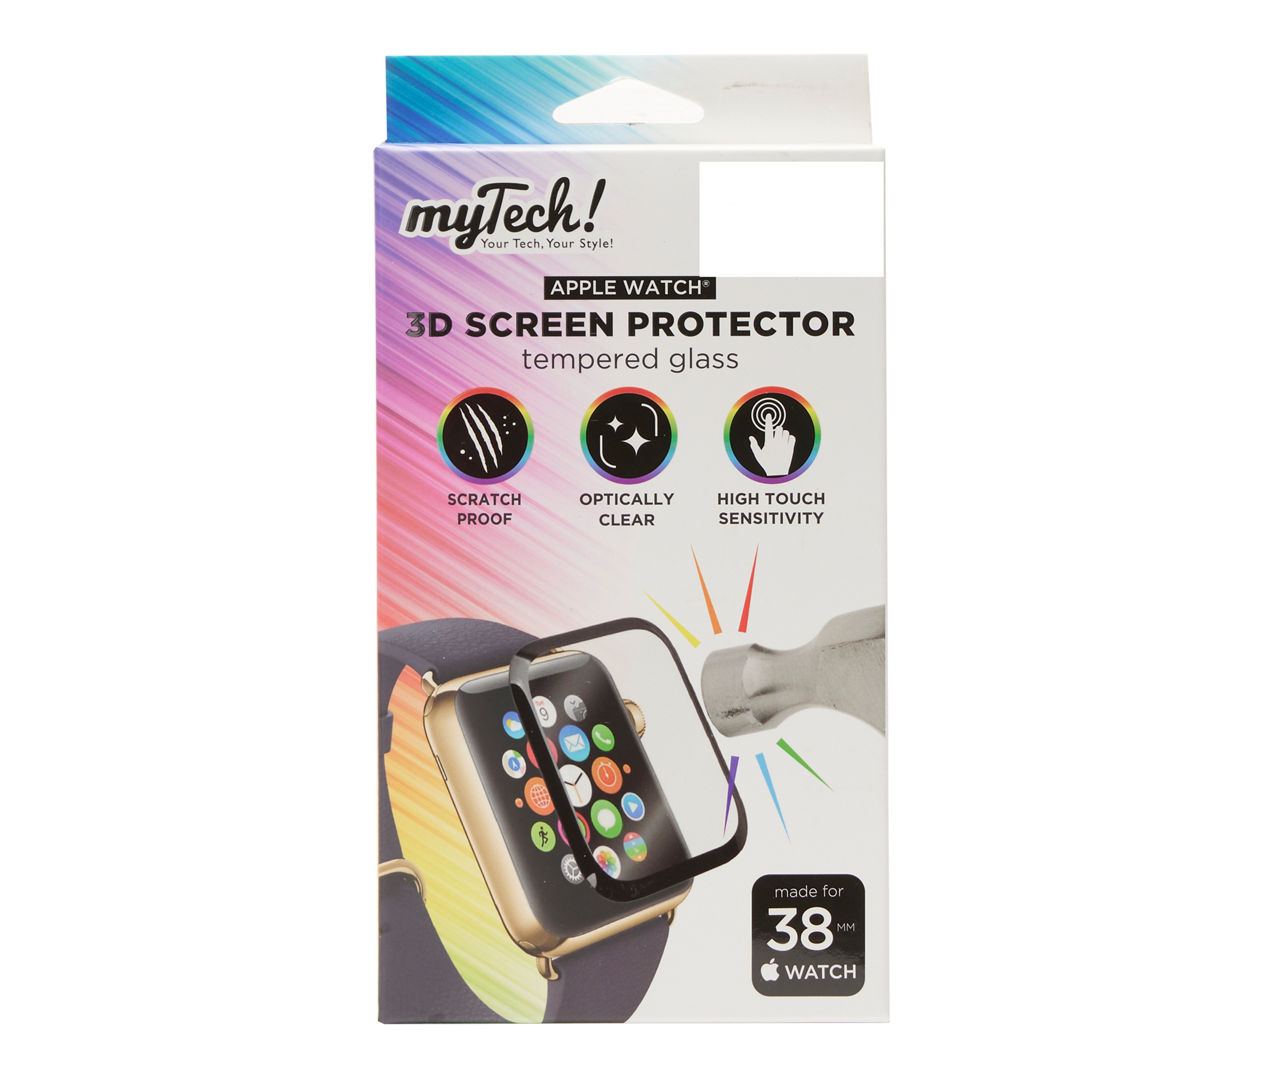 Tempered Glass Apple Watch 38mm 3D Screen Protector